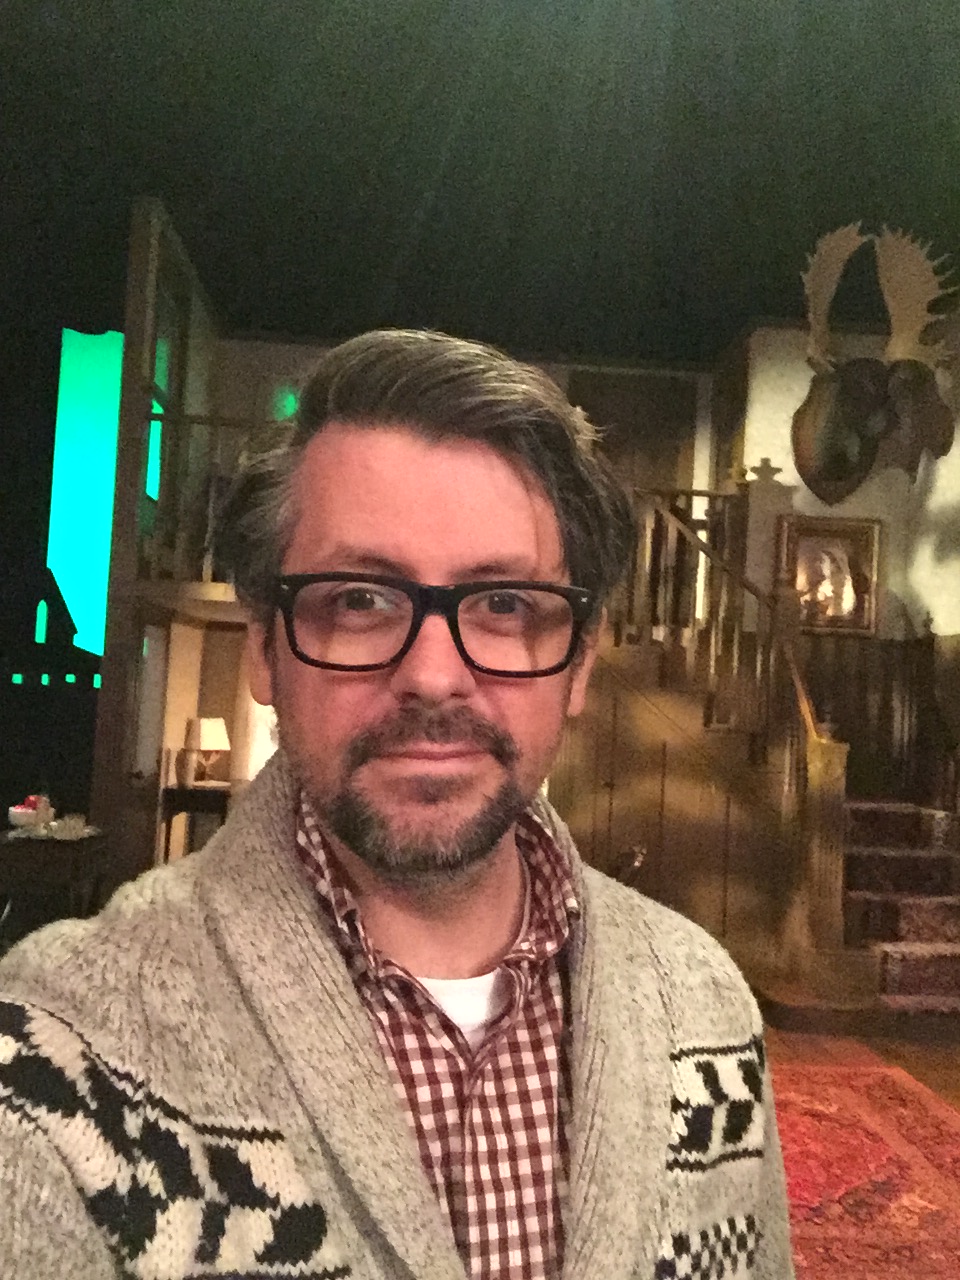 Kevin Woolridge on the set of the National Arts Centre's touring production of Tartuffe, on which he served as "Assistant Director"